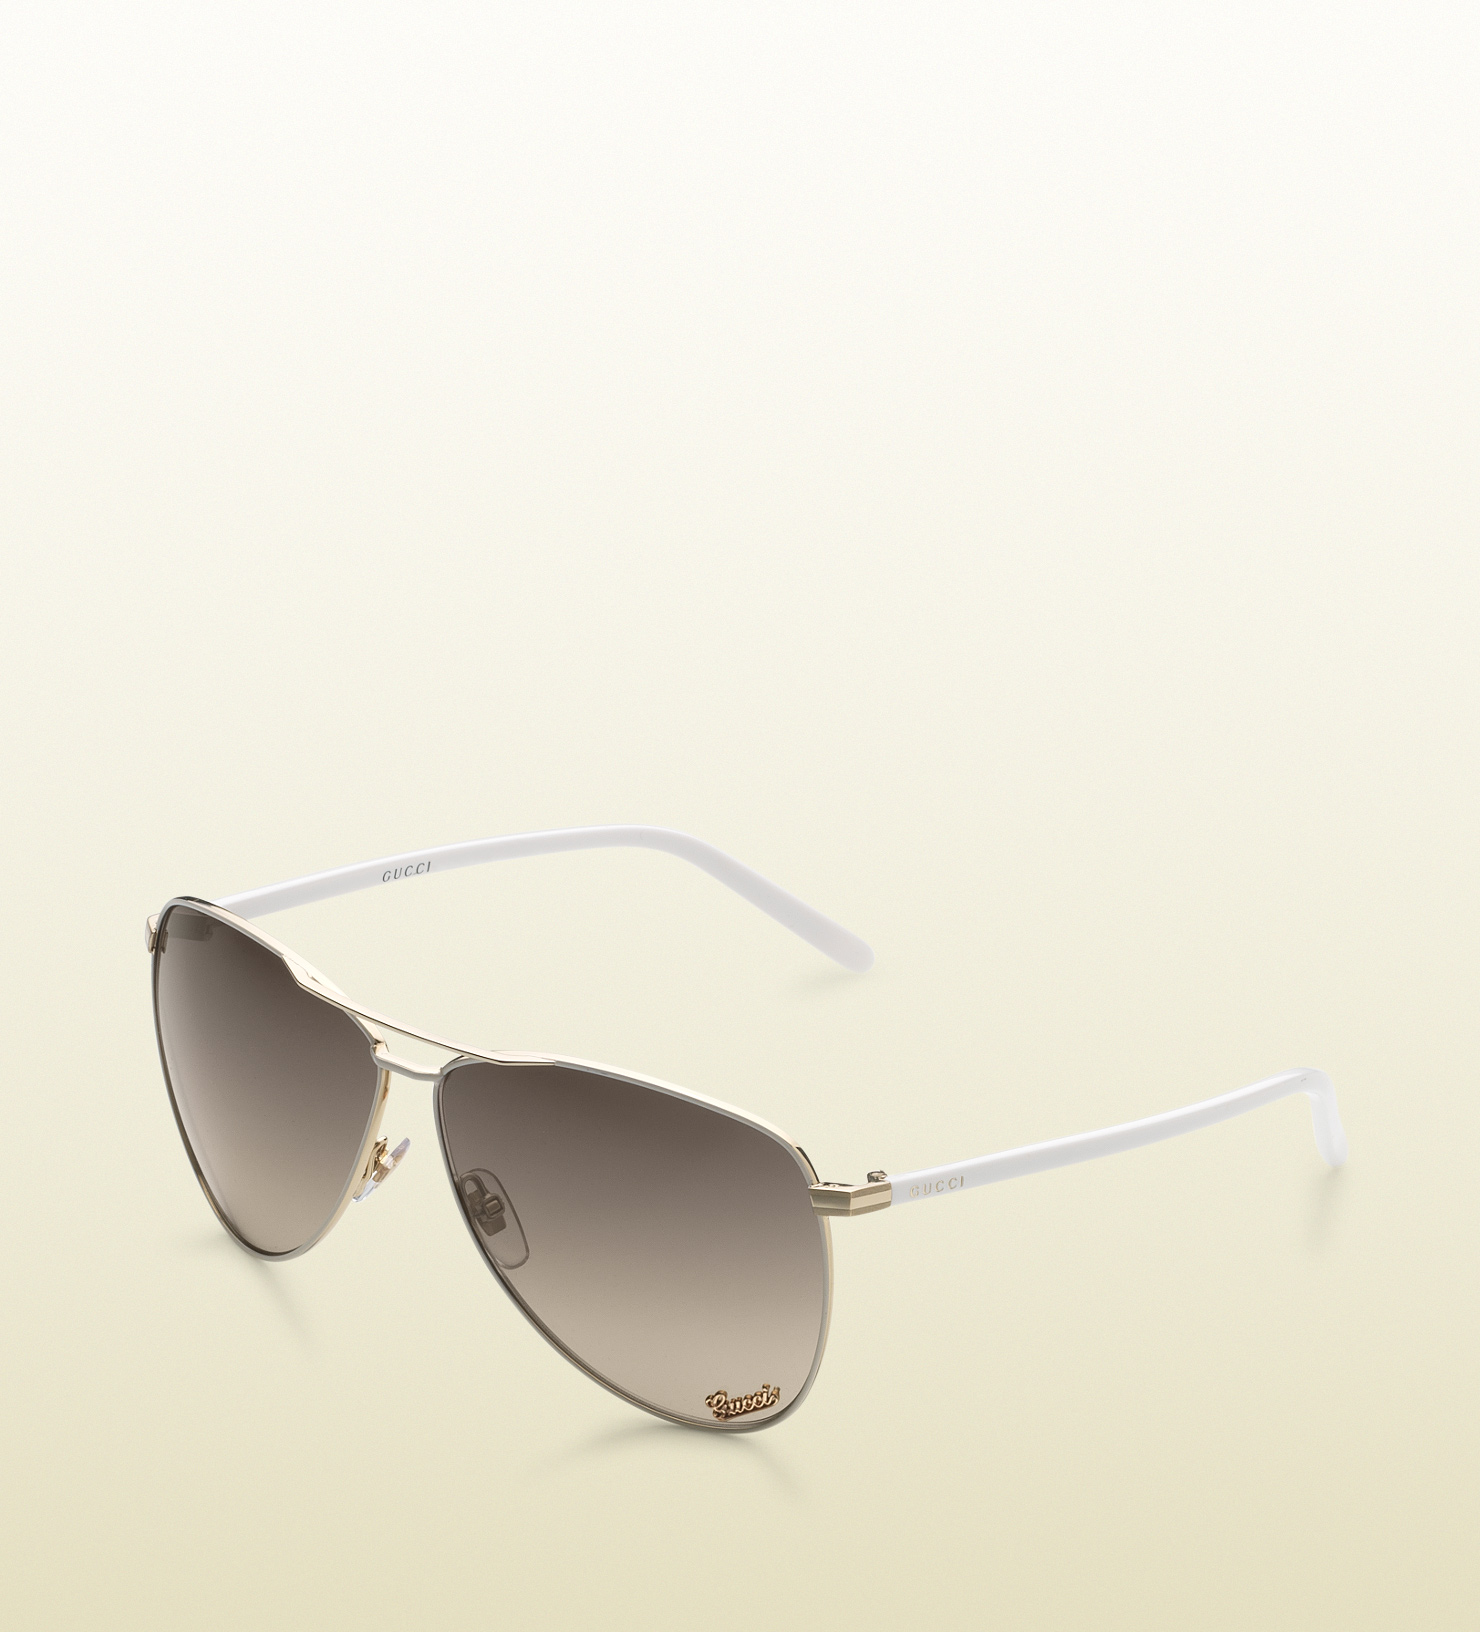 gucci sunglasses with logo on lens